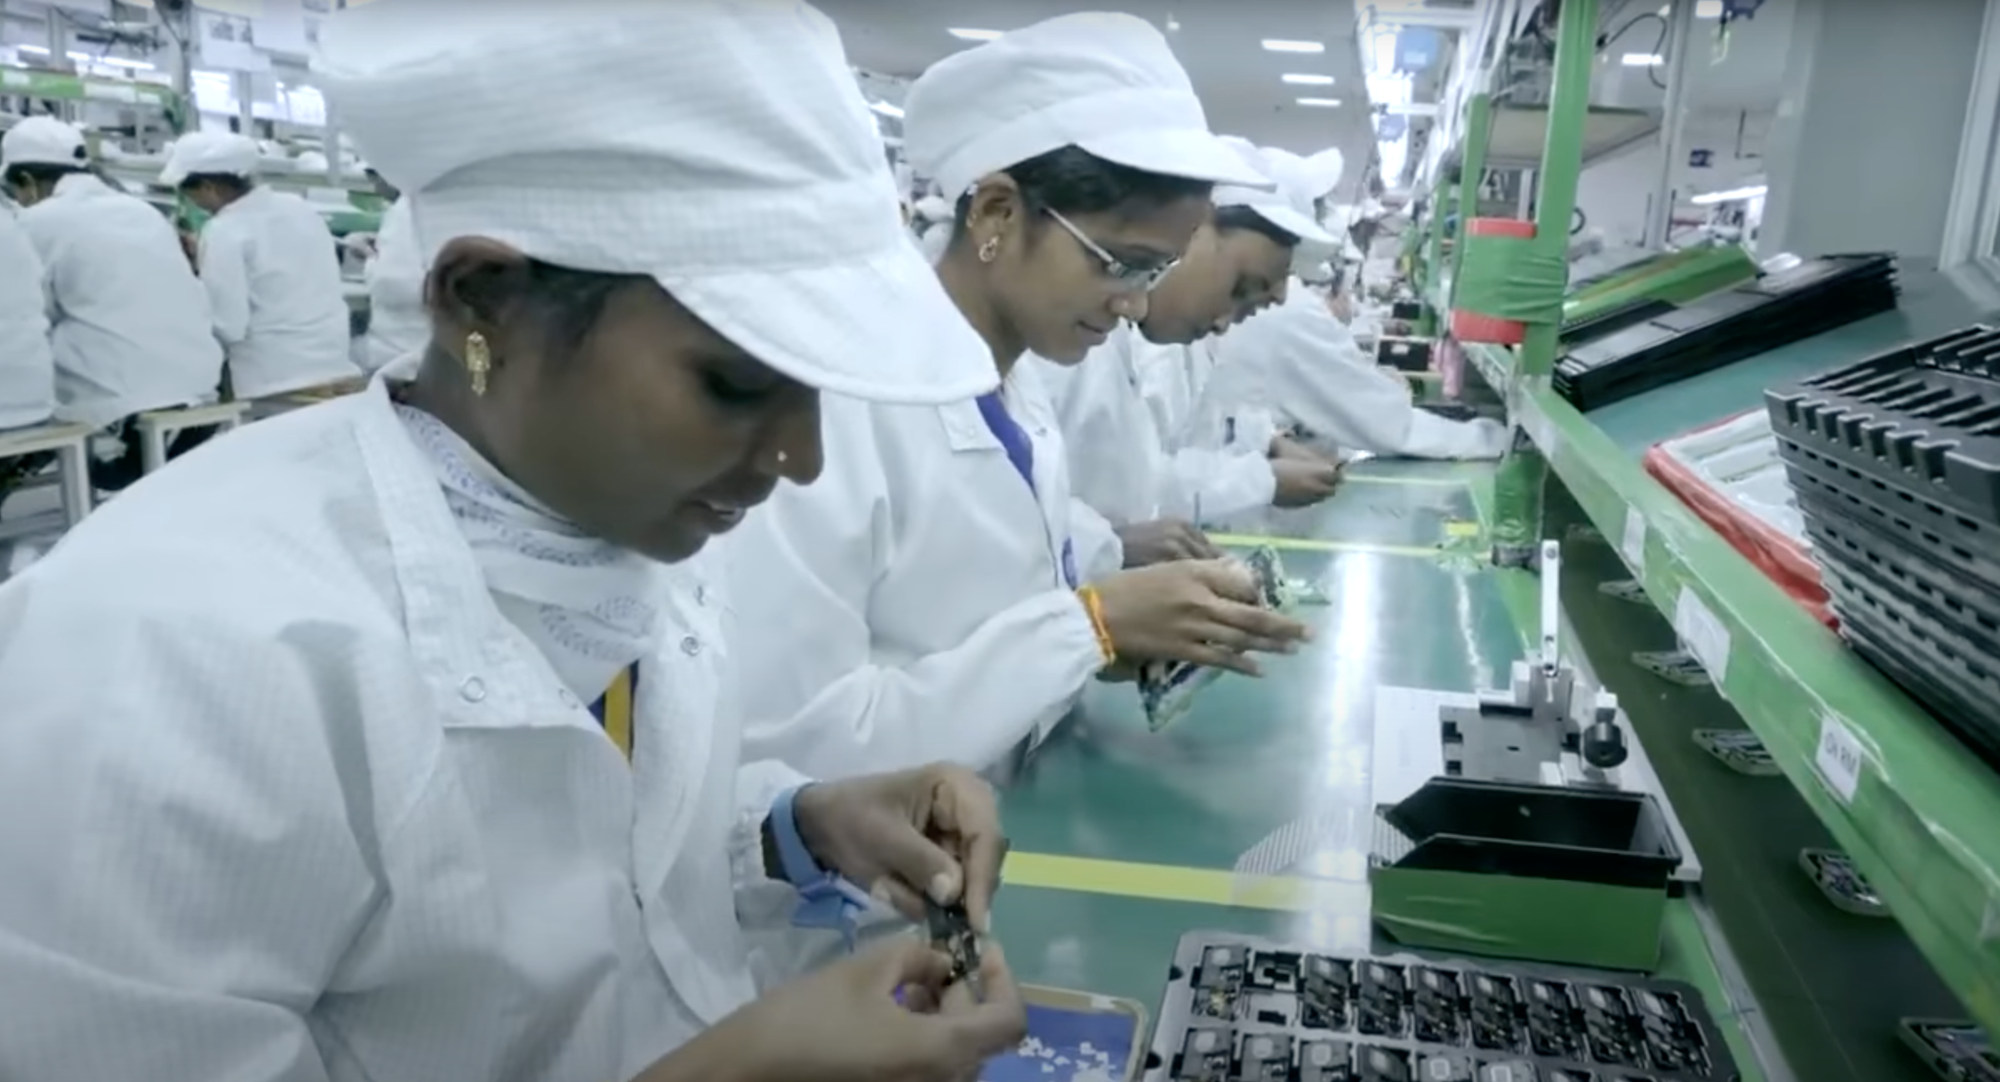 Workers are seen at an assembly line inside Foxconn Technology Group’s smartphone manufacturing complex in Sri City, a special economic zone located in Tirupati district in India’s southeastern state of Andhra Pradesh. Photo: YouTube